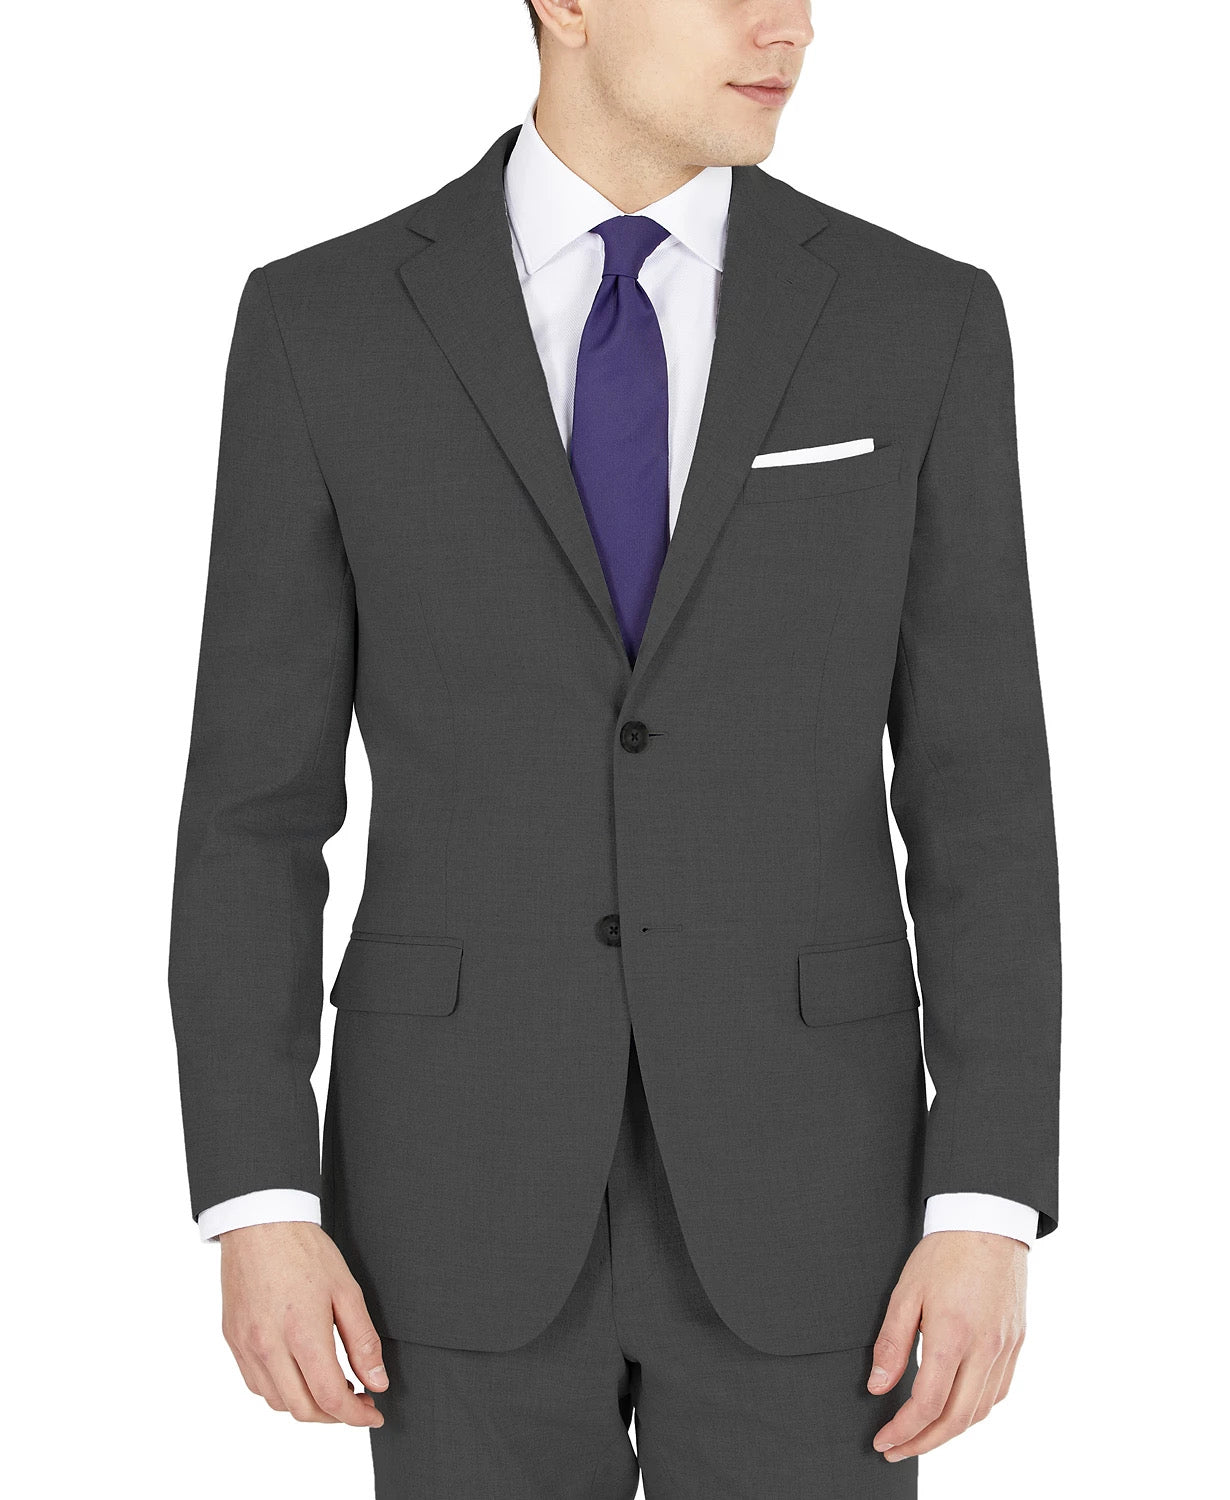 DKNY Men's Modern-Fit Stretch Suit Jacket 41R Solid Charcoal Grey